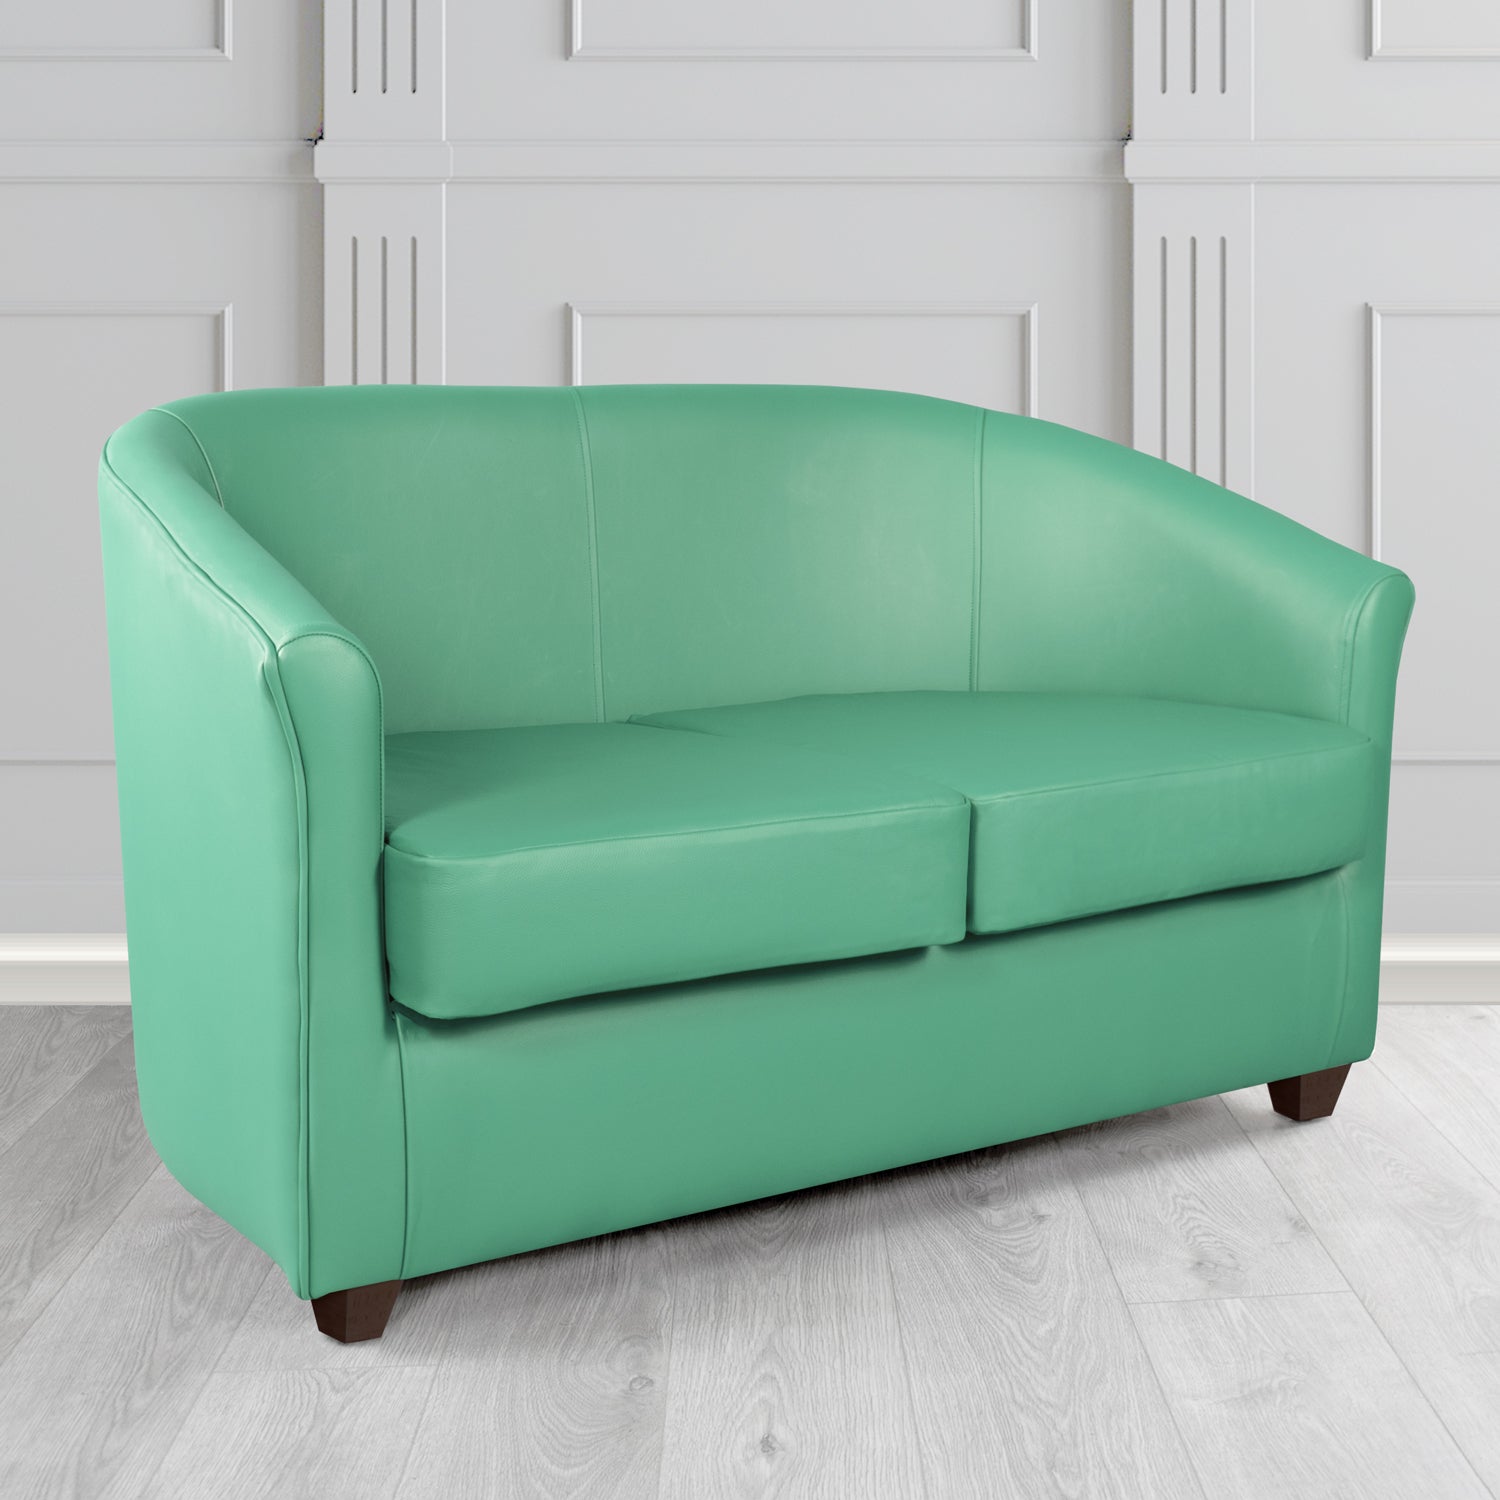 Cannes 2 Seater Tub Sofa in Just Colour Applemint Crib 5 Faux Leather - The Tub Chair Shop